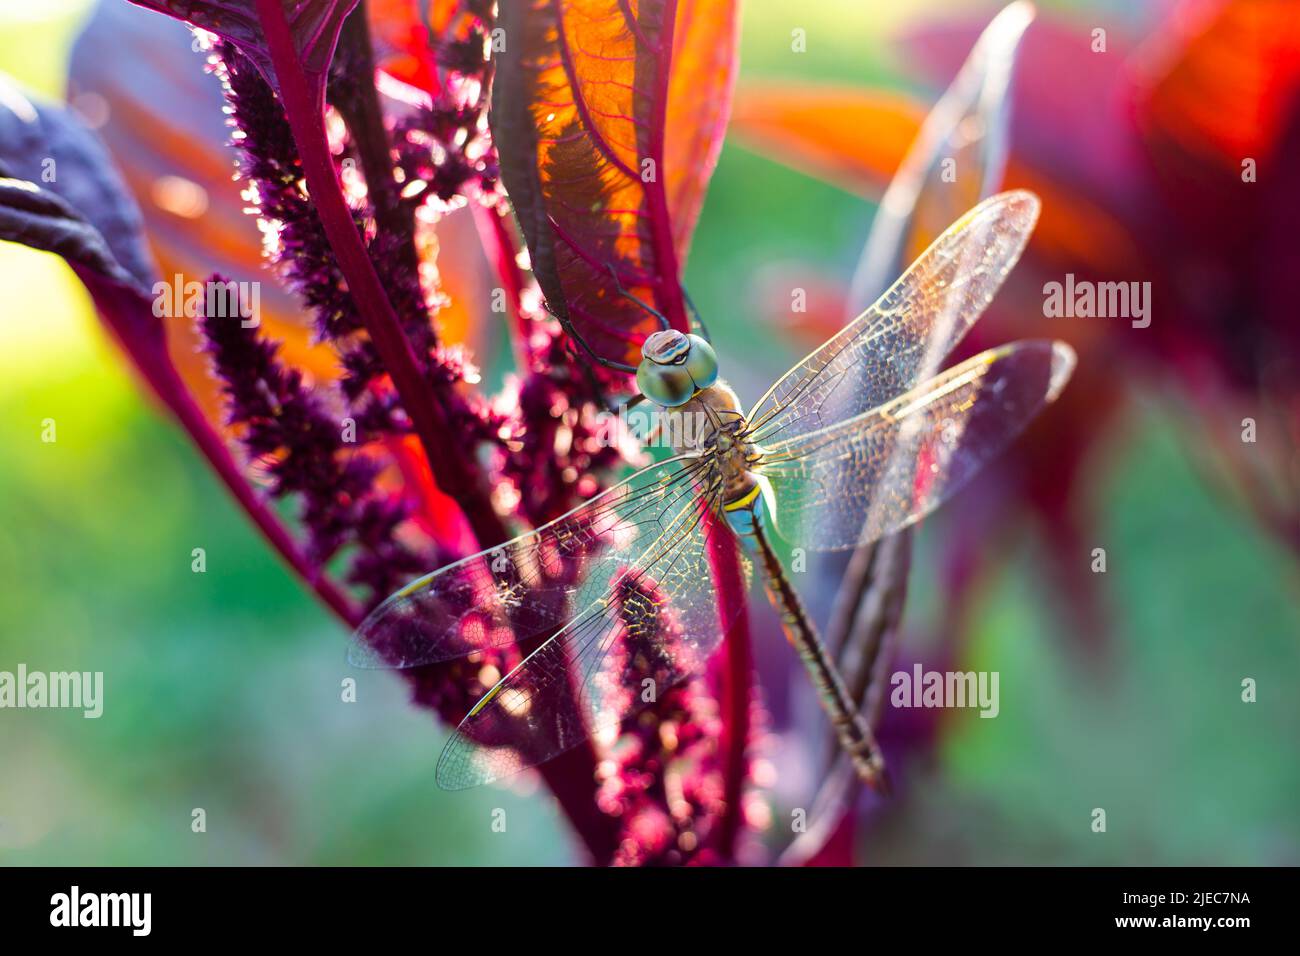 A large beautiful dragonfly on a flower of vegetable amaranth lit by the rays of the sun. Stock Photo